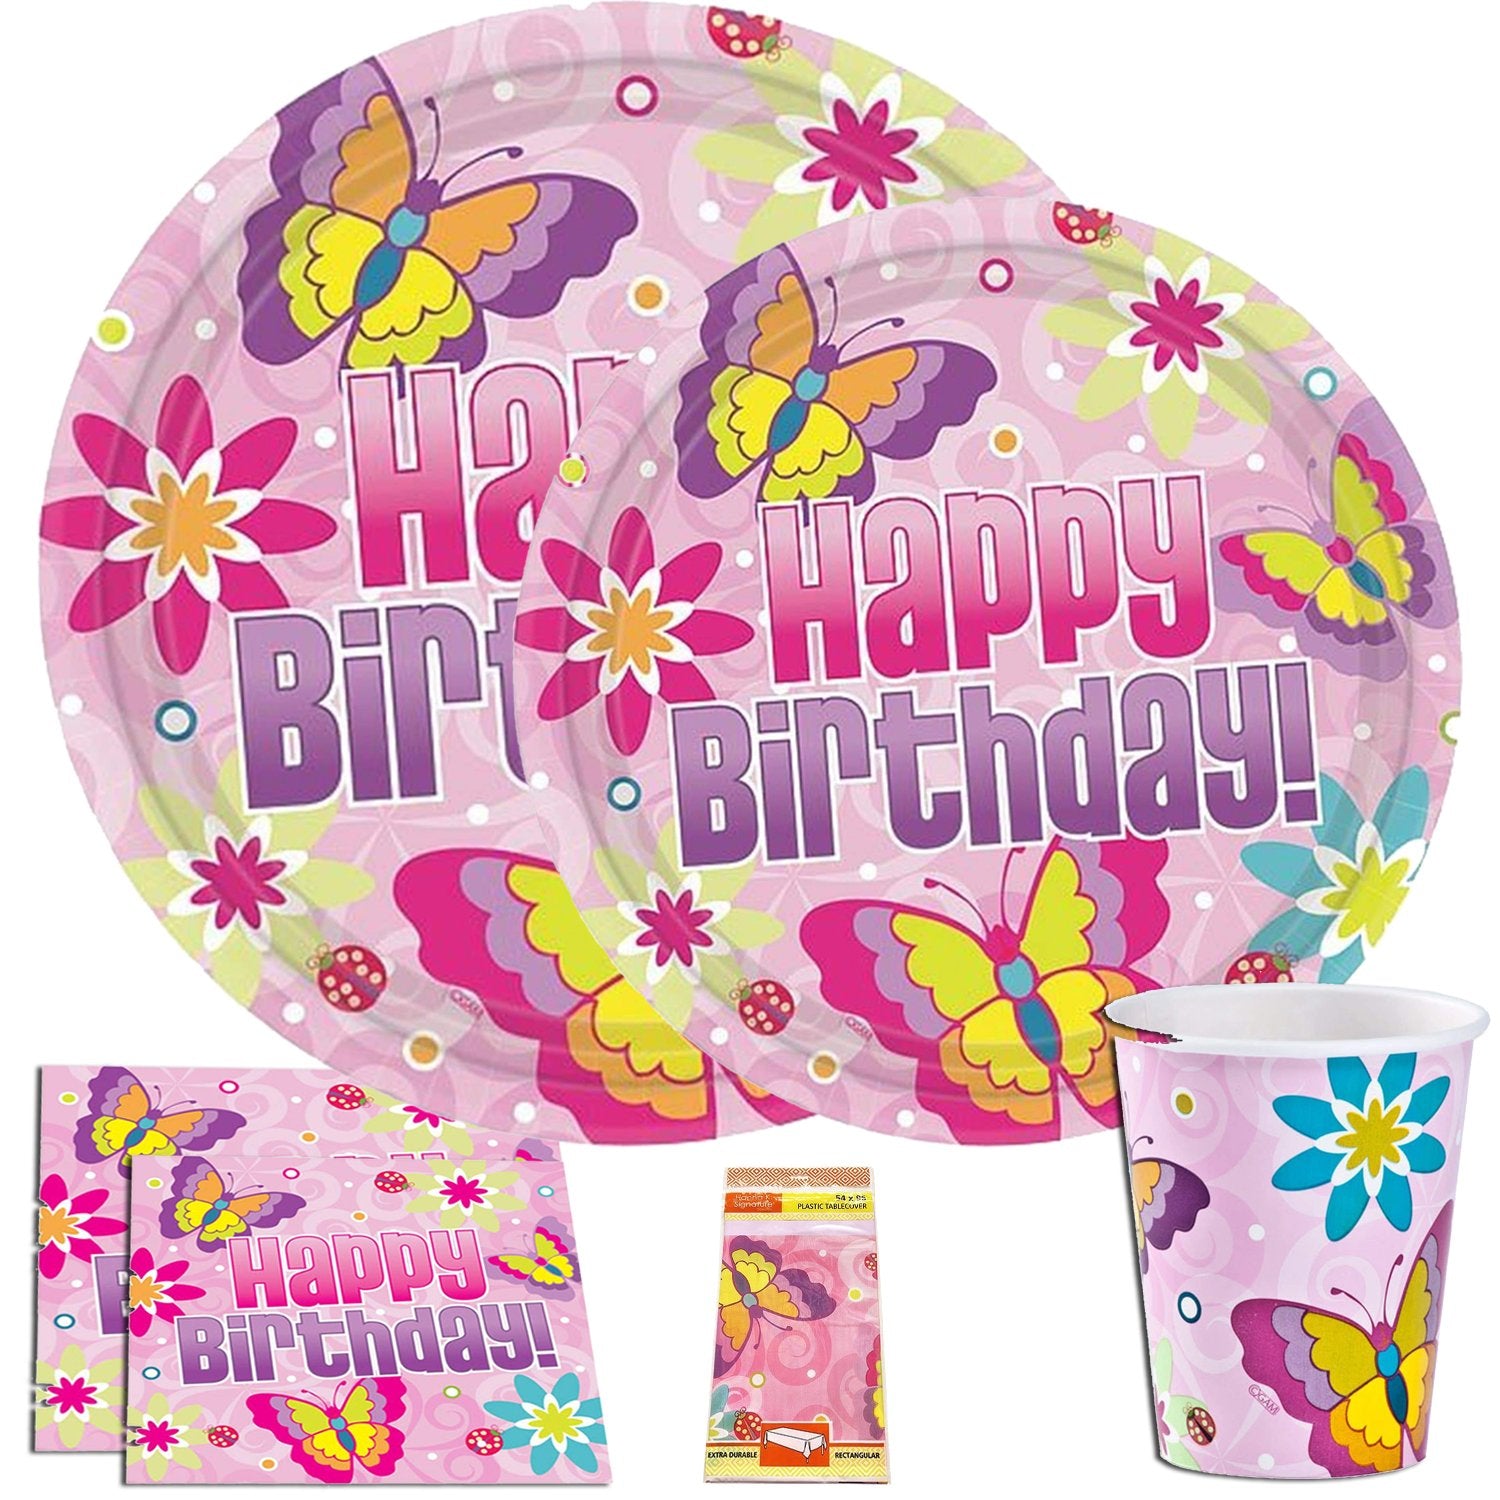 SALE Hanna K. Signature Special Bday Butterfly Luncheon Napkins 40 count Disposable Hanna K Signature   